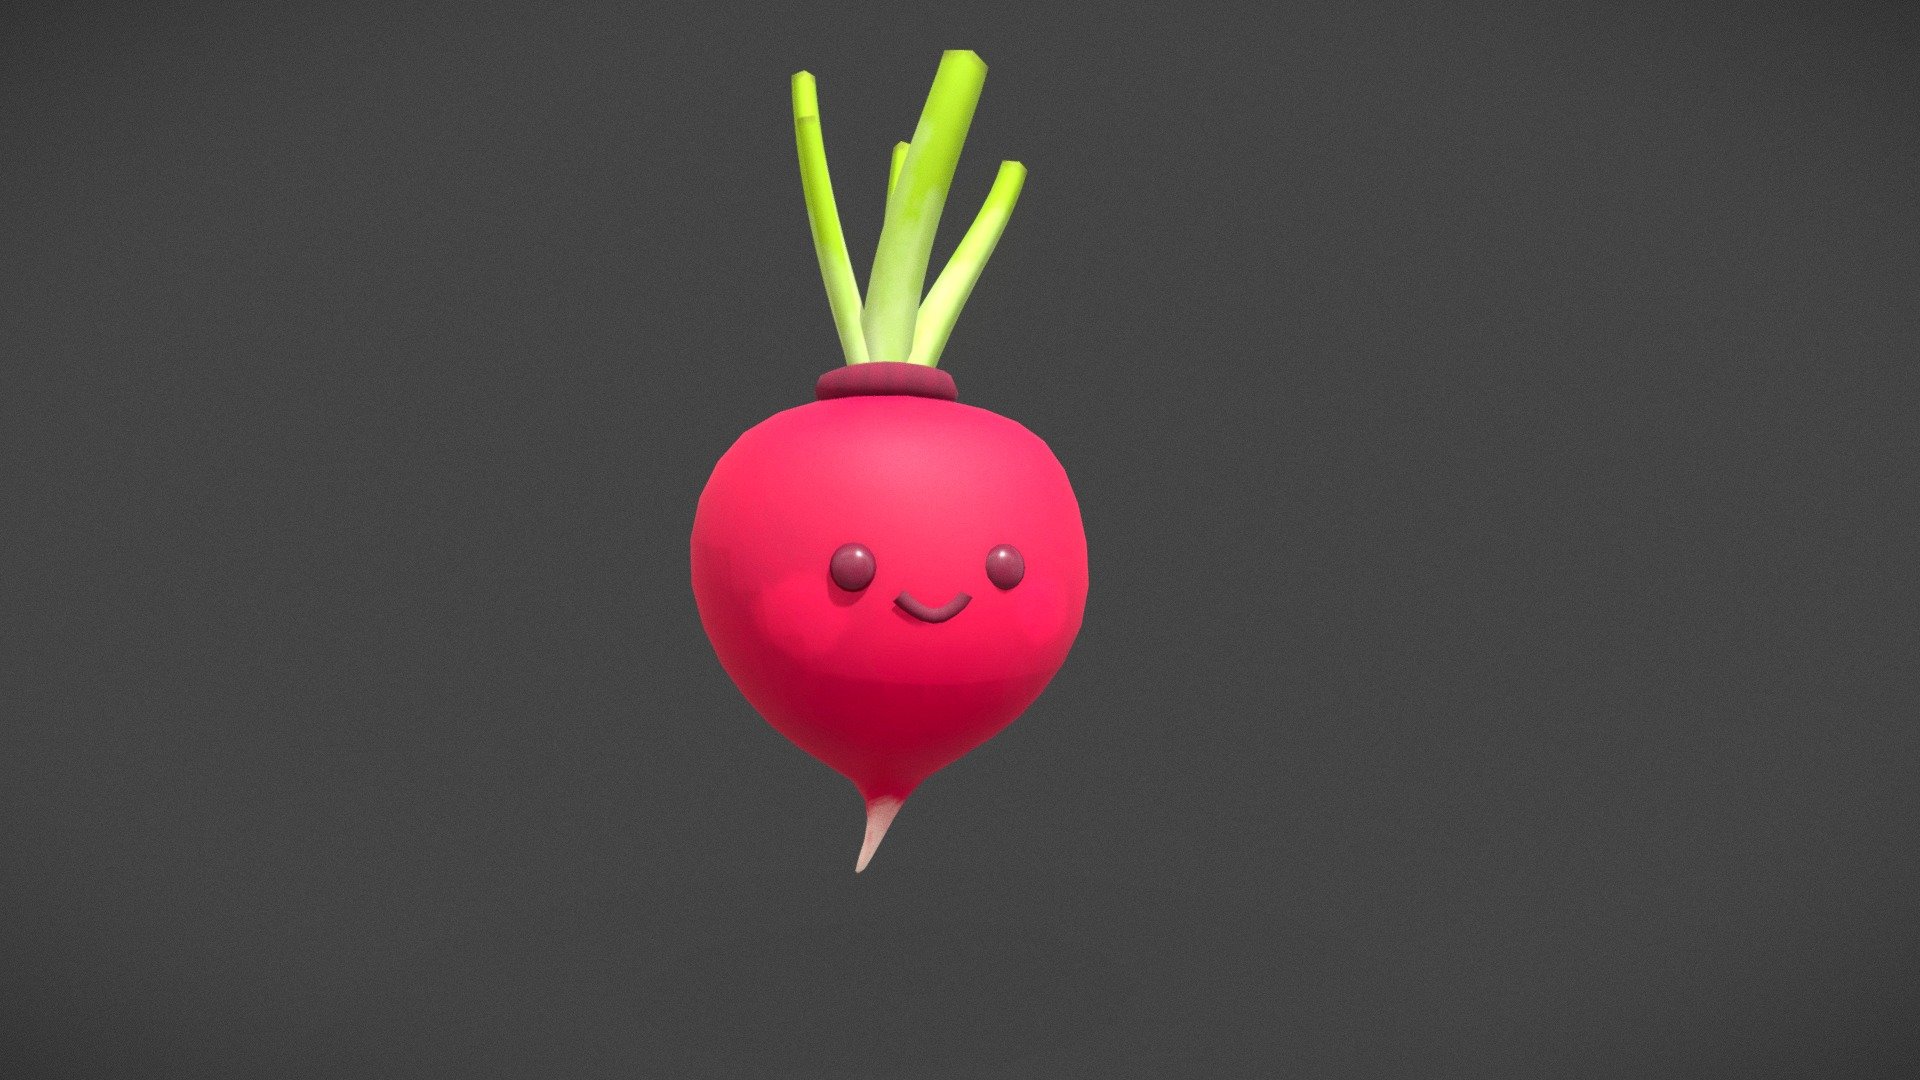 A rad lad with a fresh new haircut!
Inspired by the radlad character from Ooblets: https://ooblets.com/ooblets/ - Rad Lad - Download Free 3D model by Rick Hoppmann (@tinyruin) 3d model